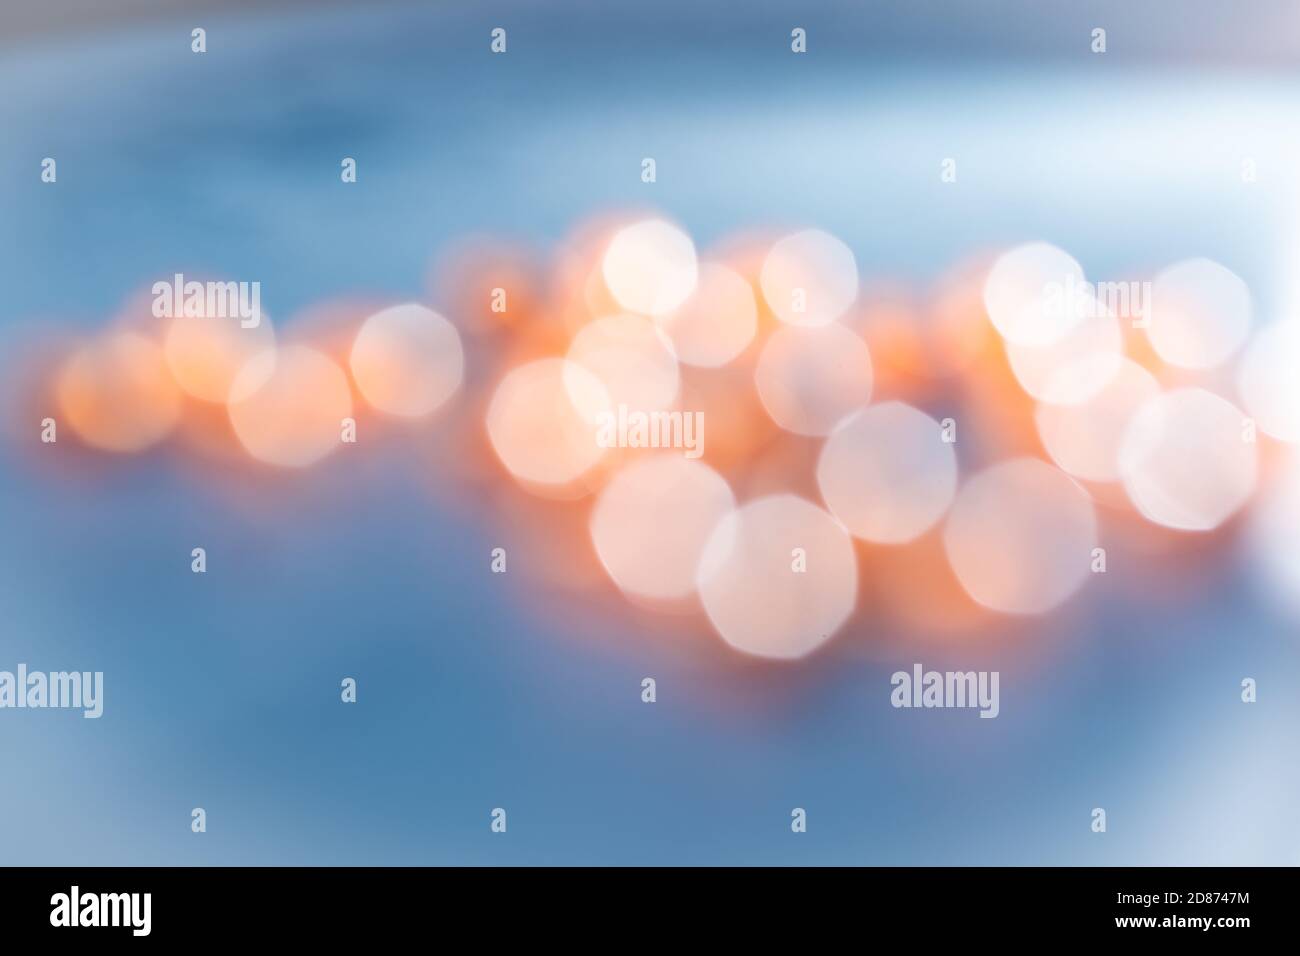 Minimalist and simple abstract blurred background in blue with orange lights bokeh Stock Photo